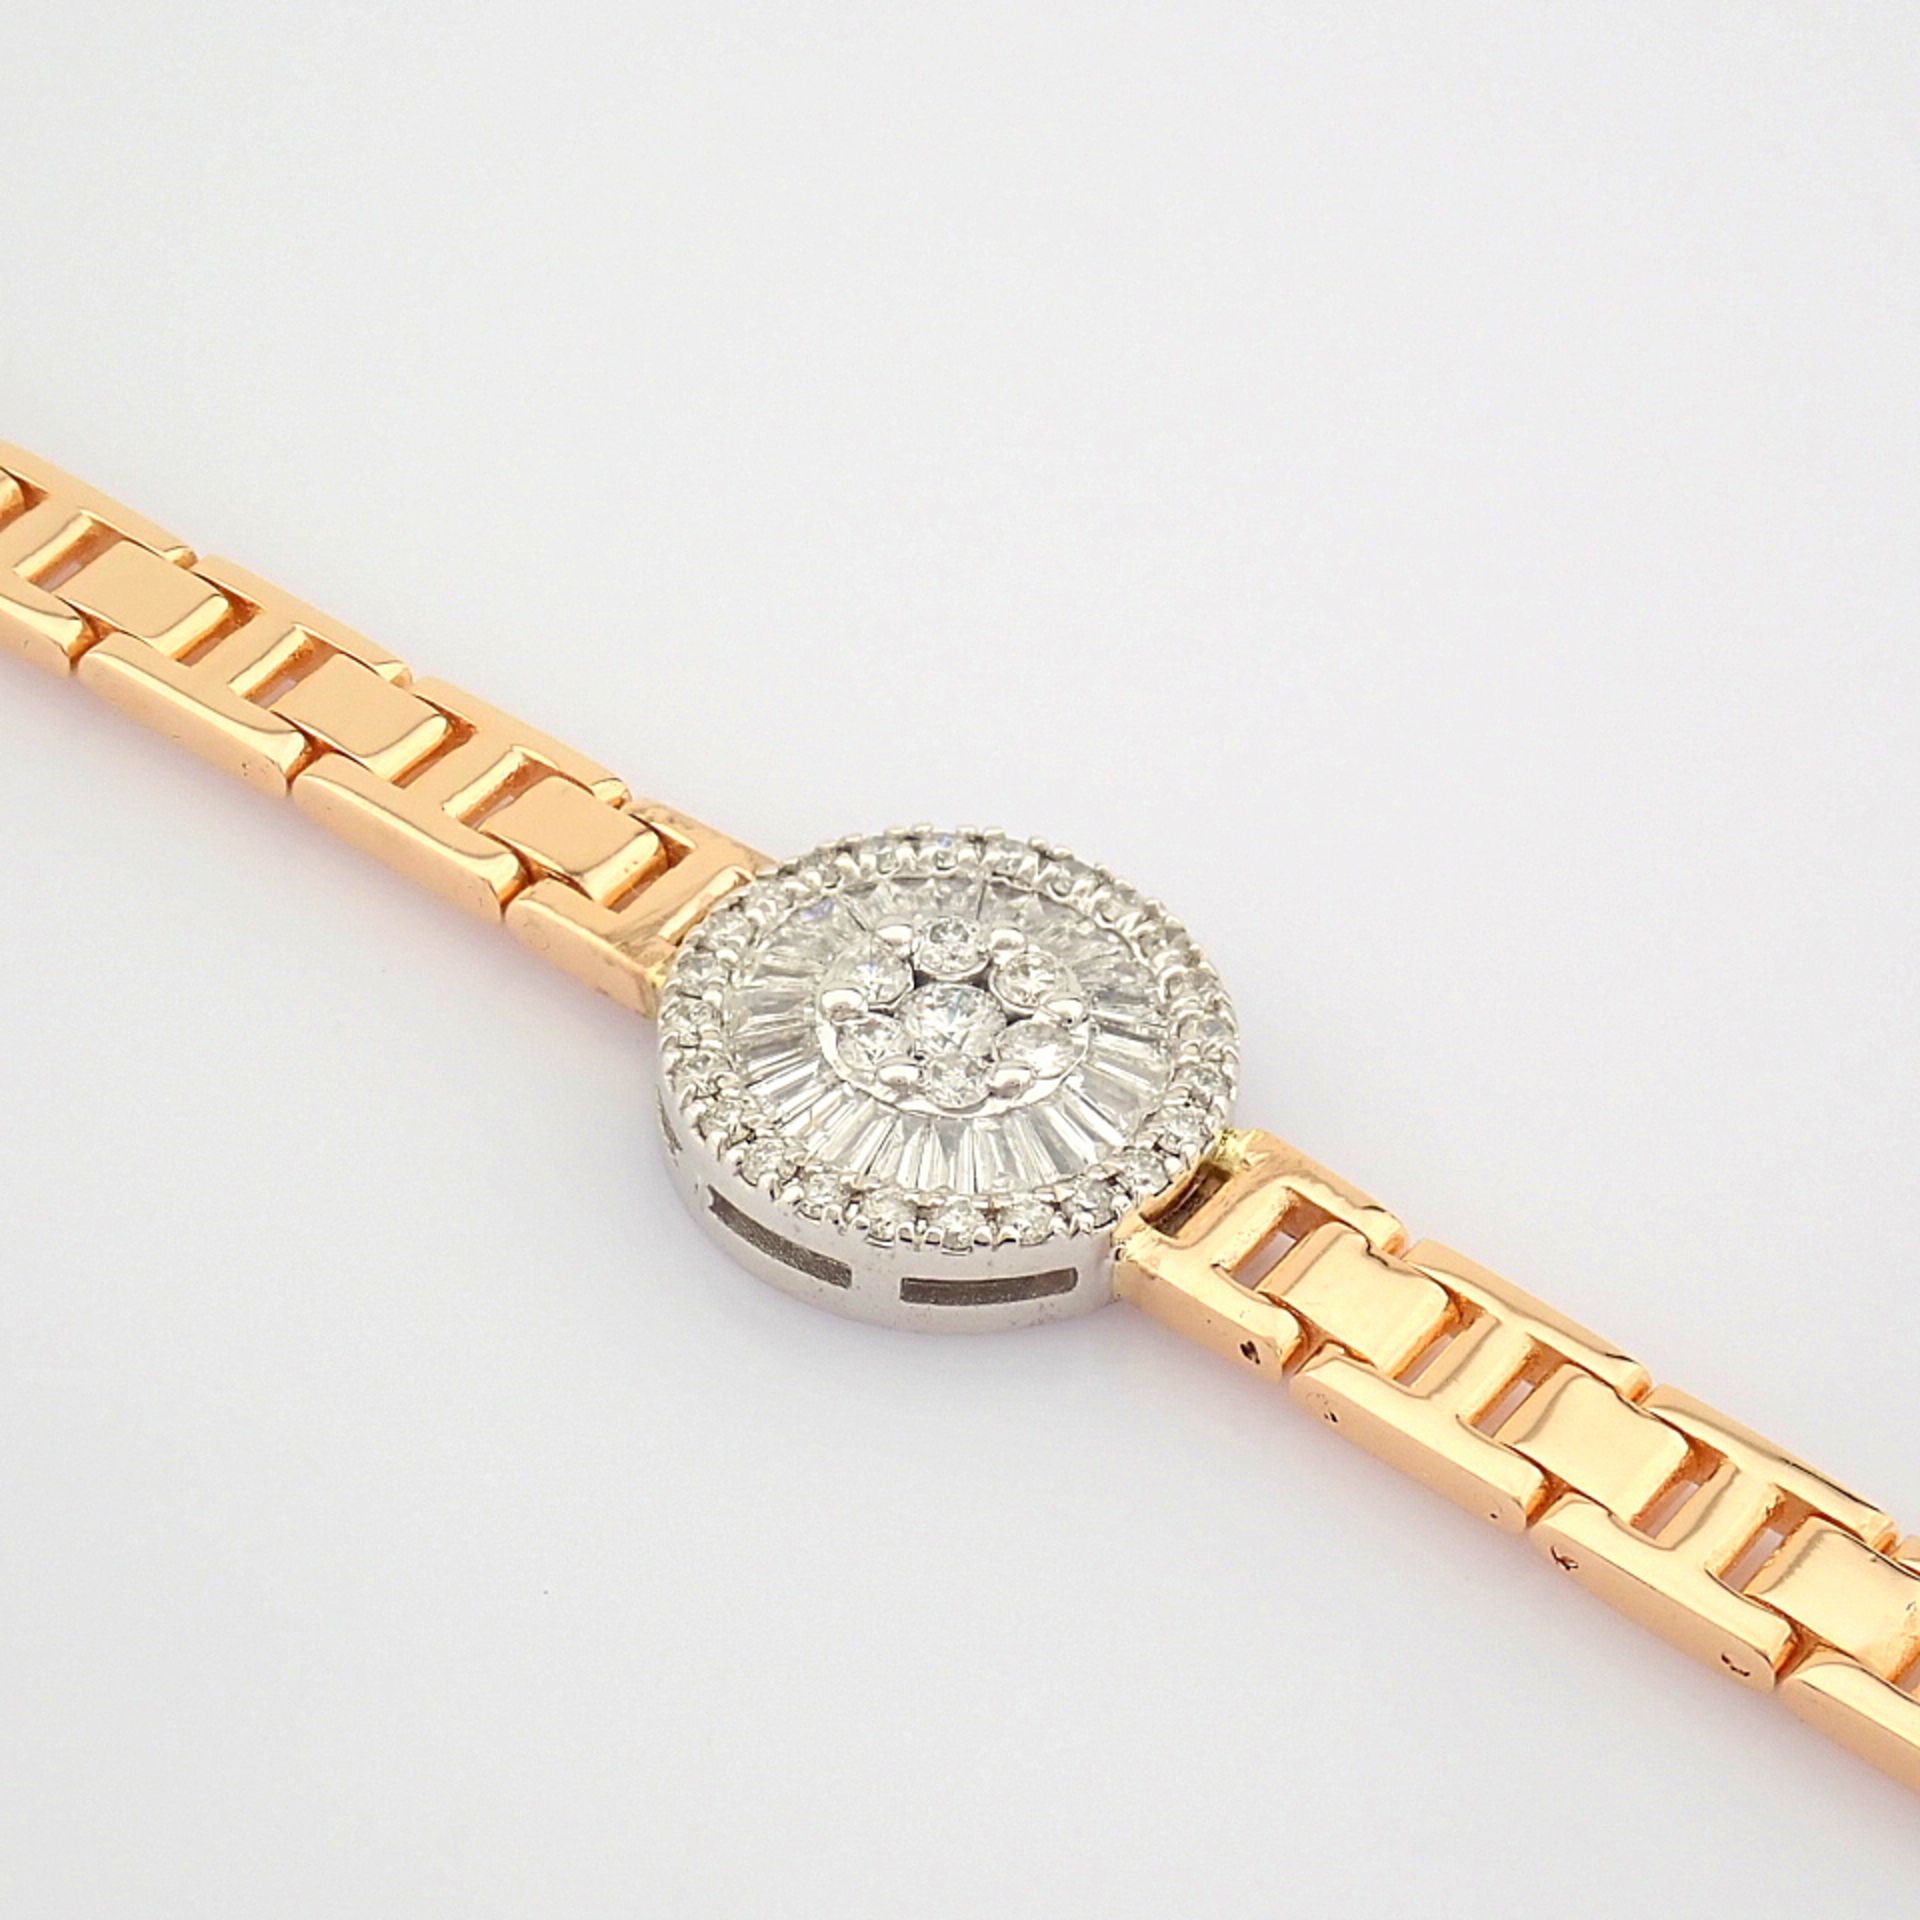 Certificated 14K White and Rose Gold Diamond & Baguette Diamond Bracelet (Total 0.52 ct Stone) - Image 4 of 10